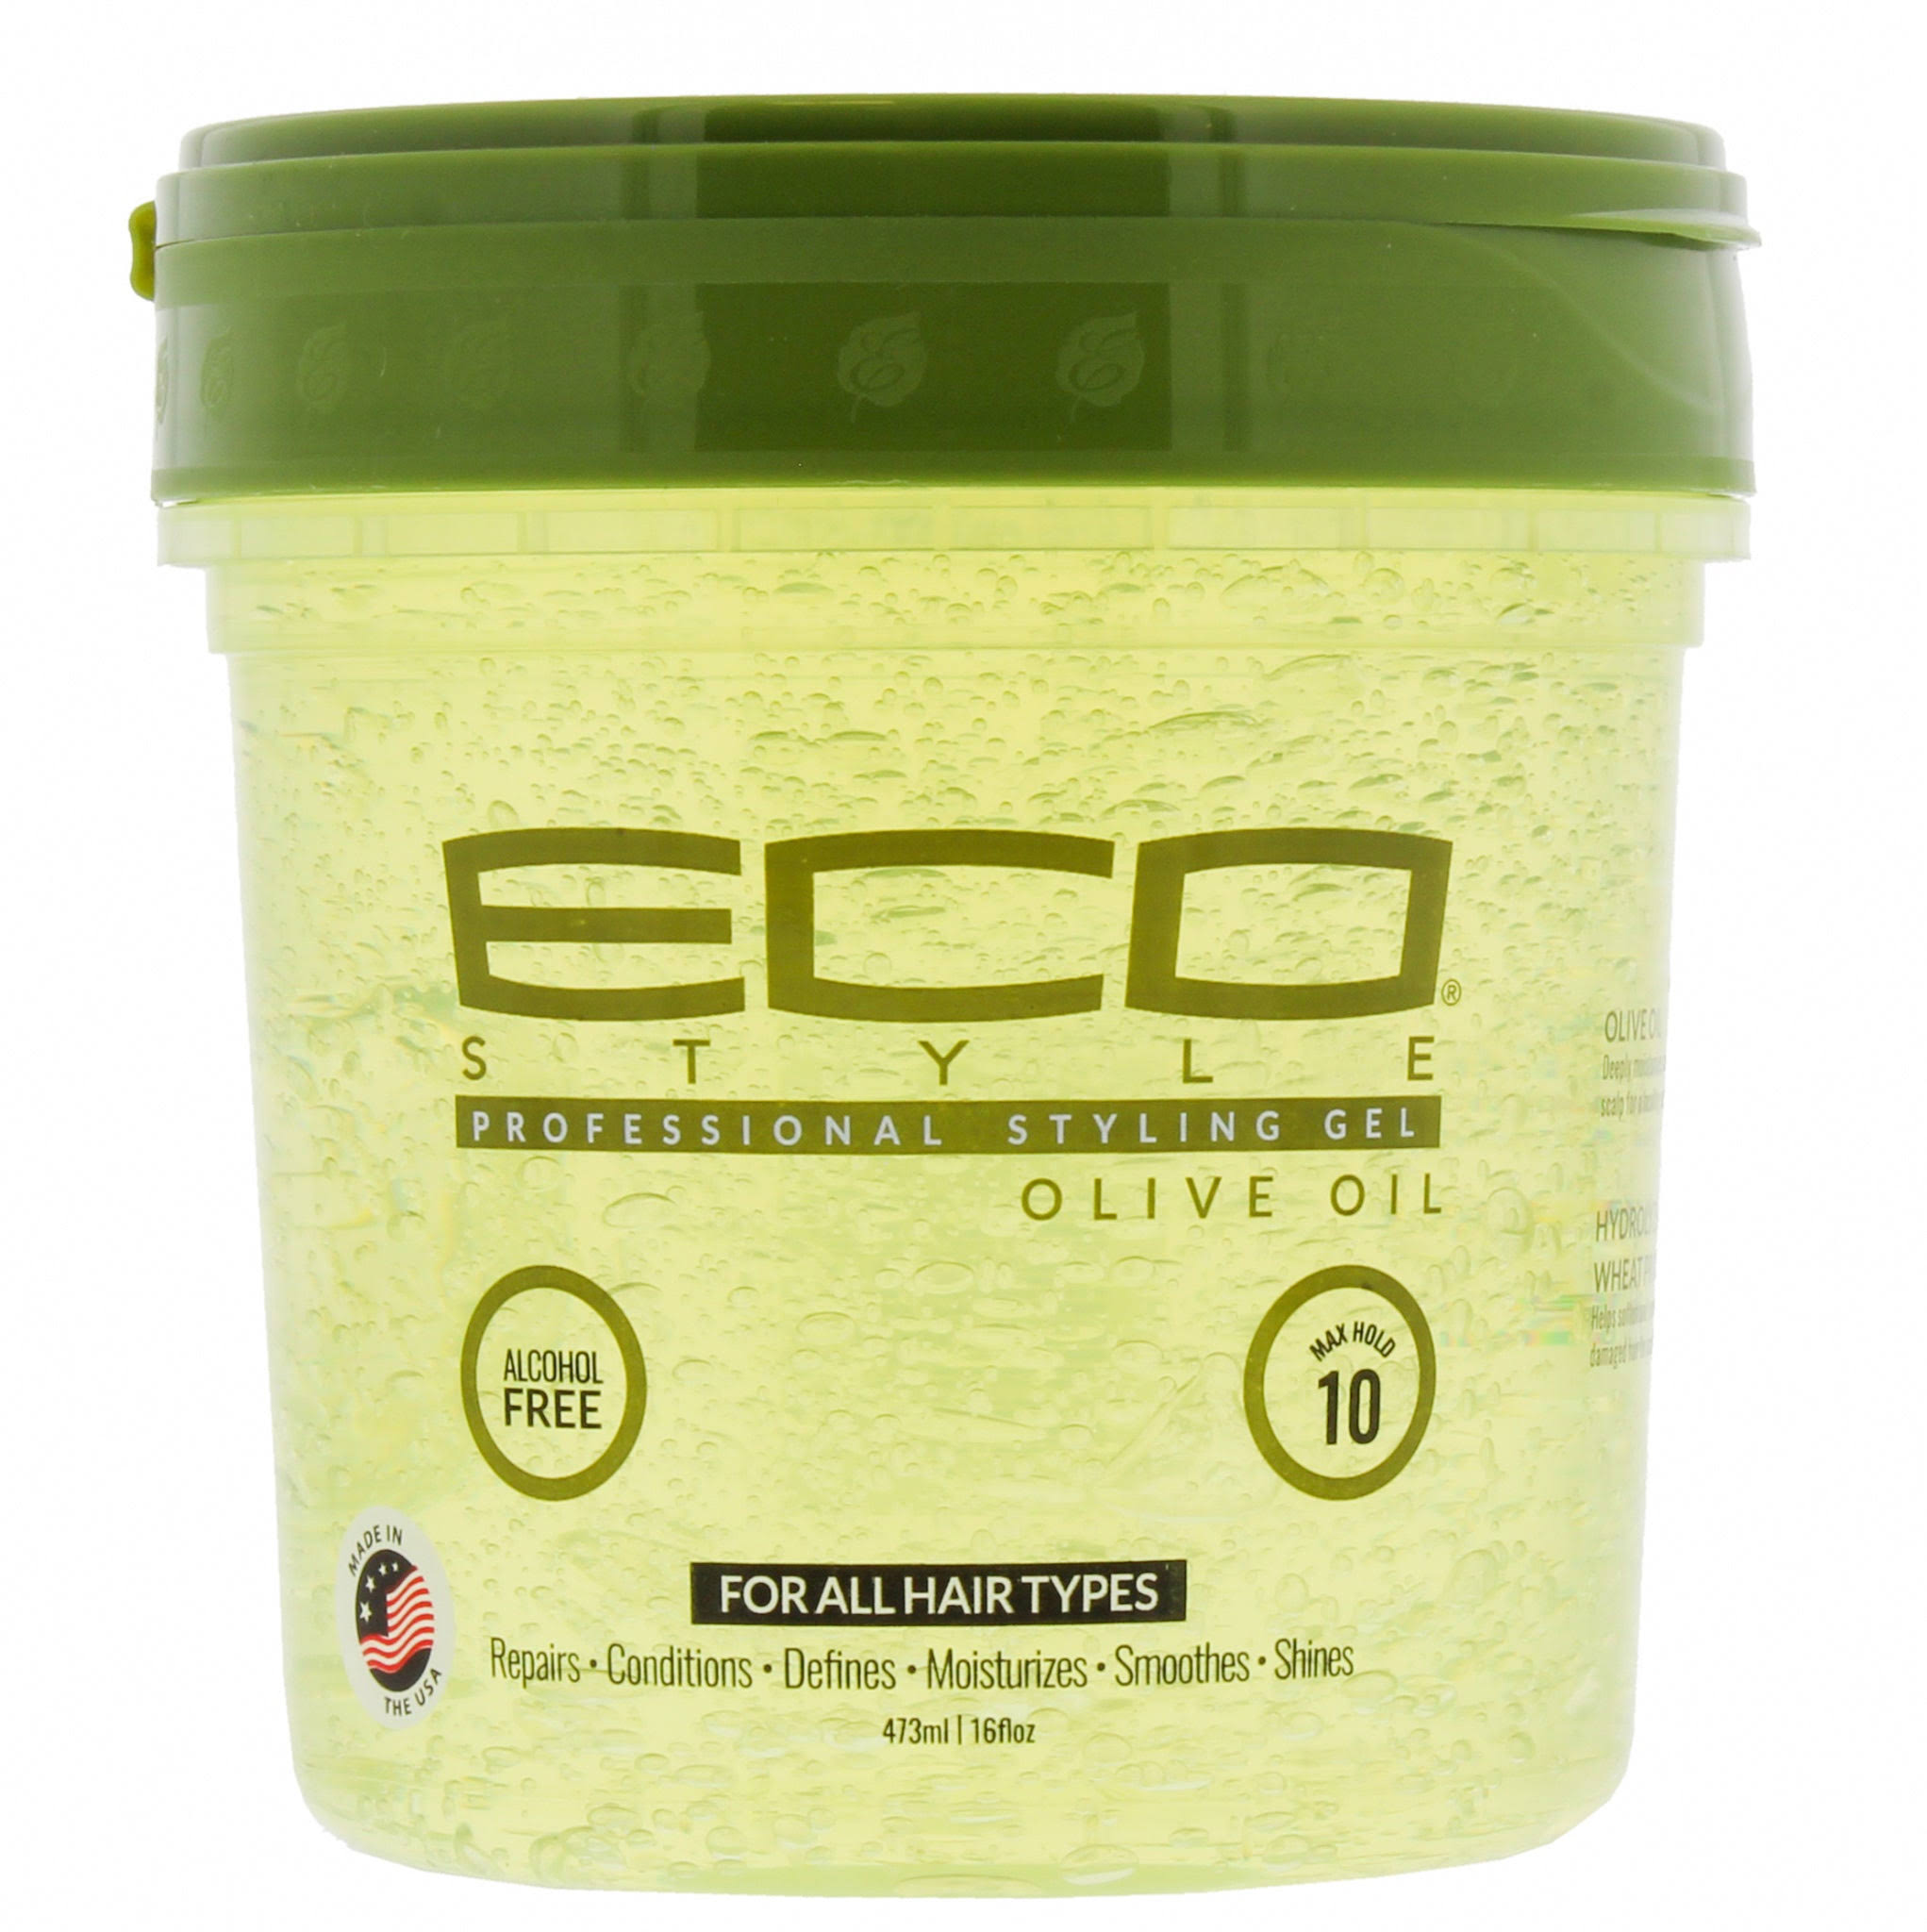 Eco Style Professional Styling Gel Olive Oil - 470ml